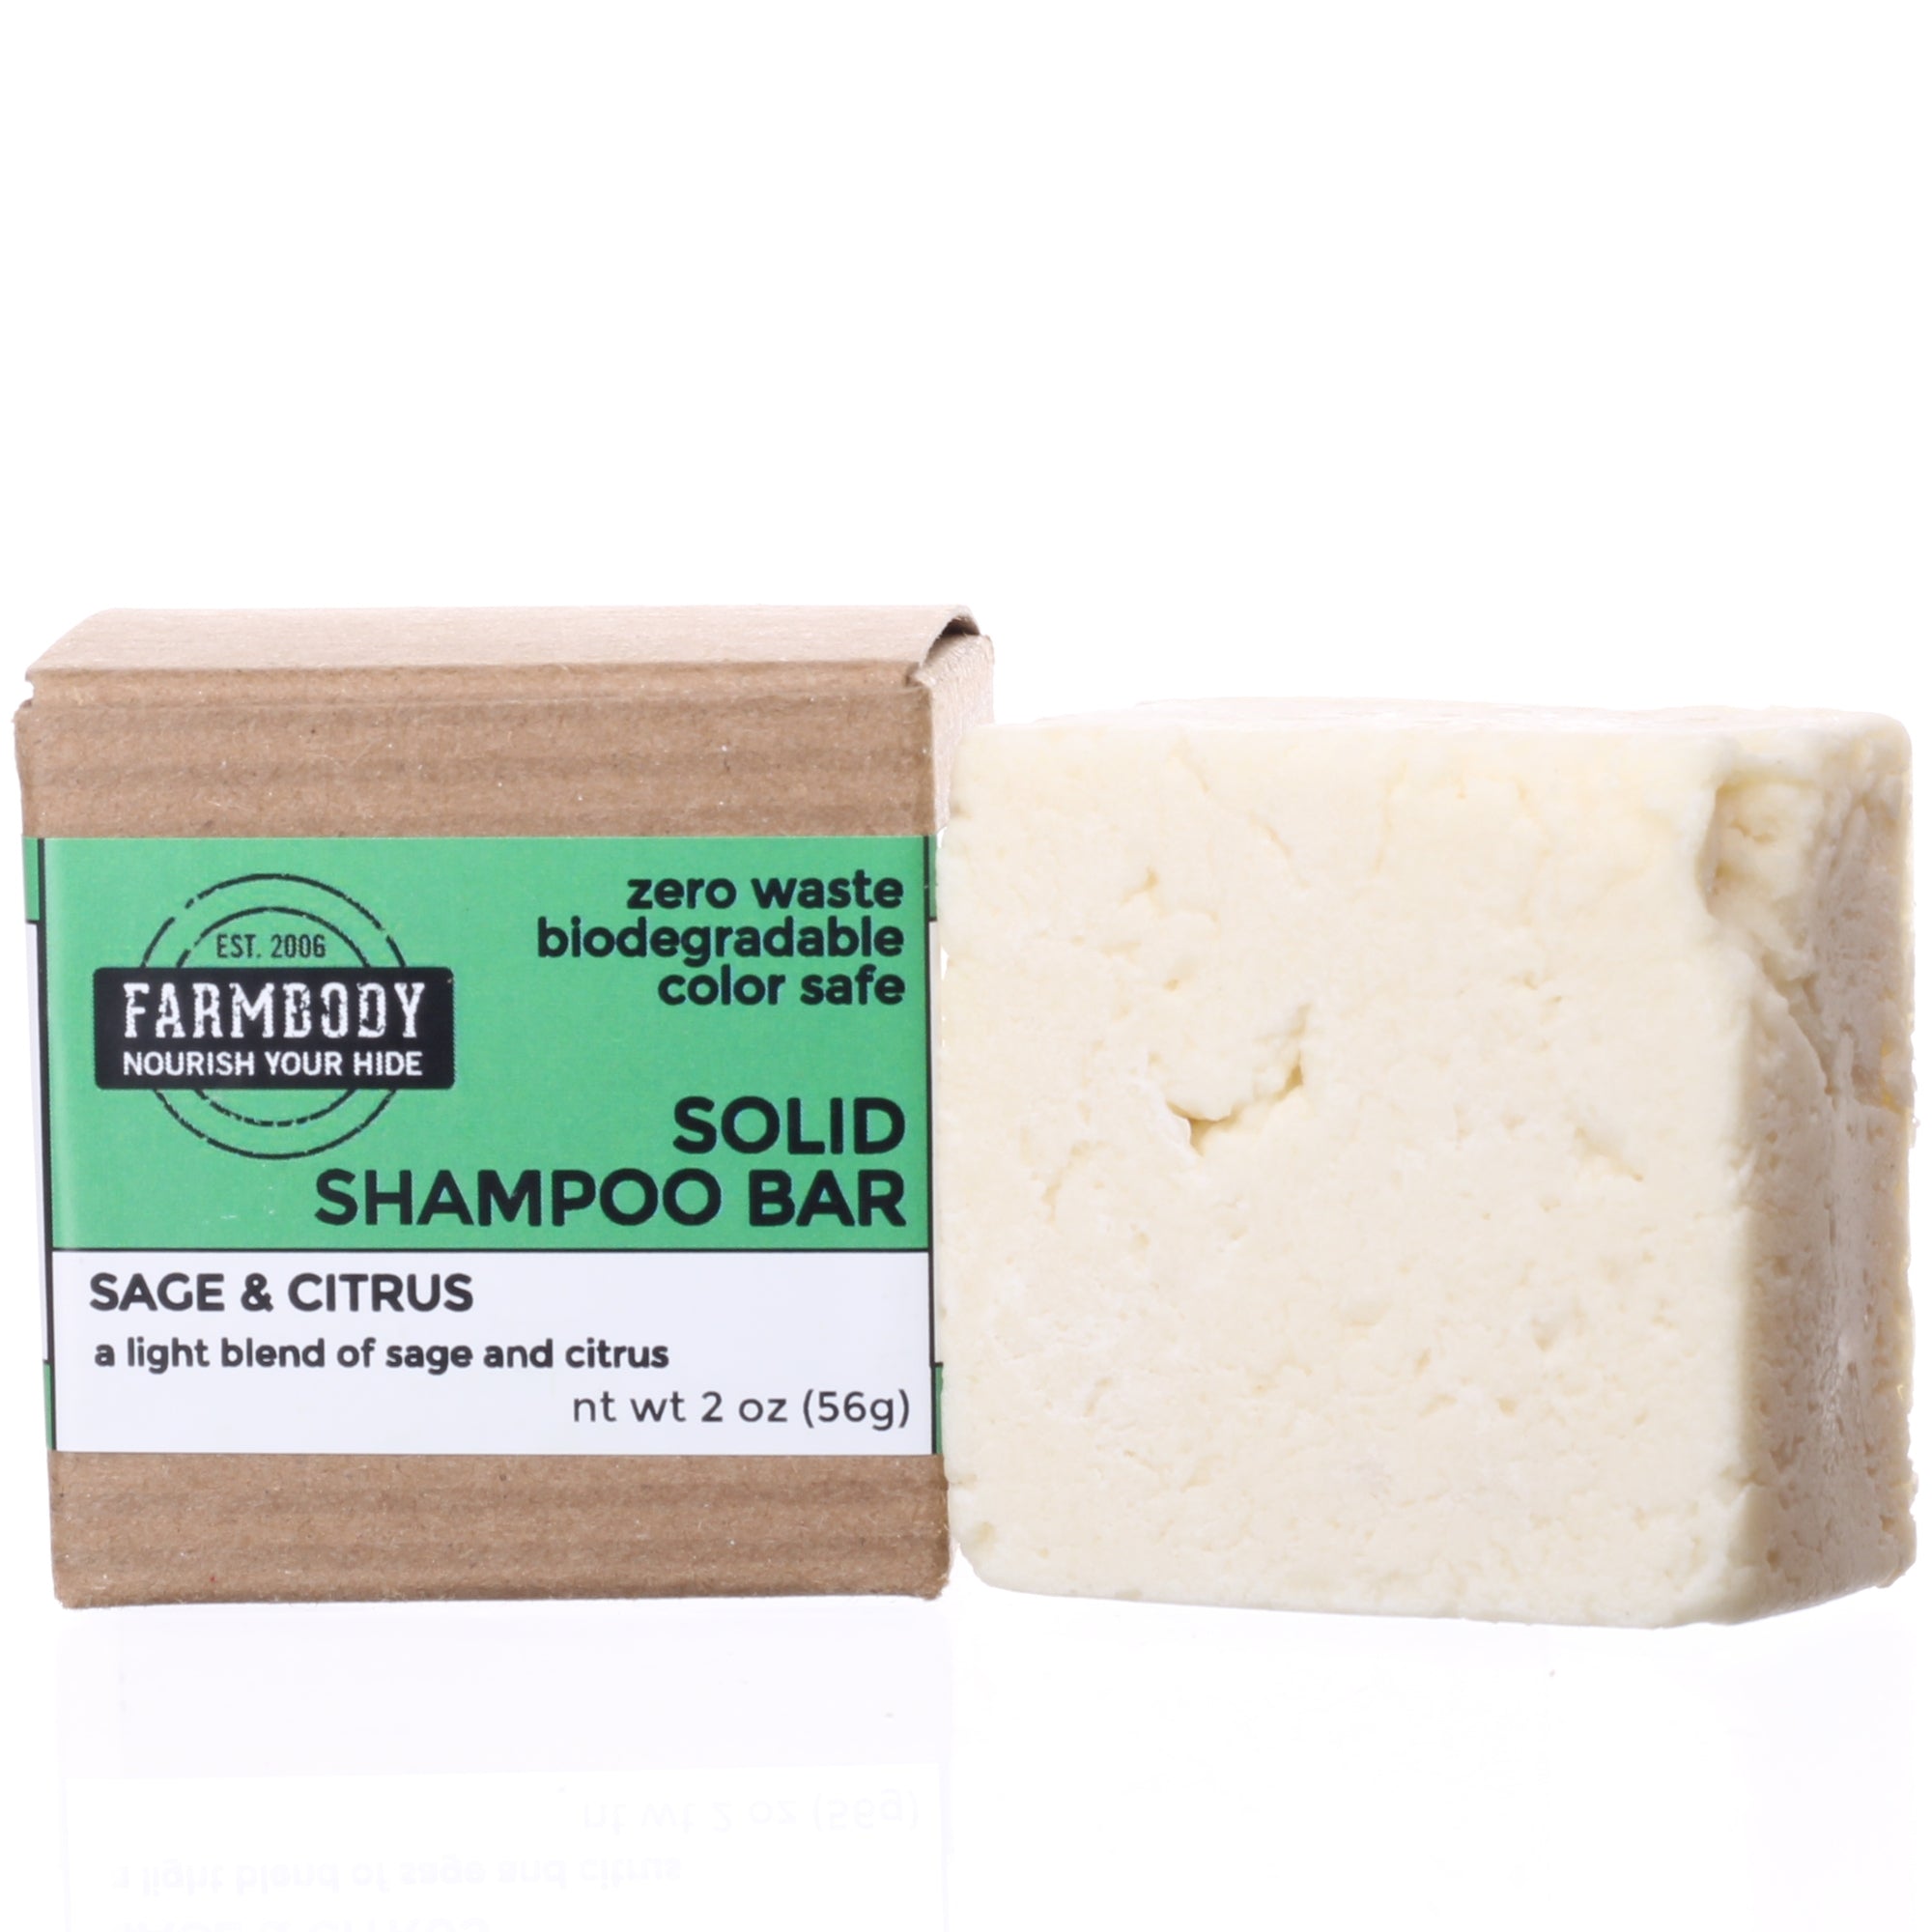 Farmbody solid shampoo bar sulfate free in sage and citrus fragrance the bar is square